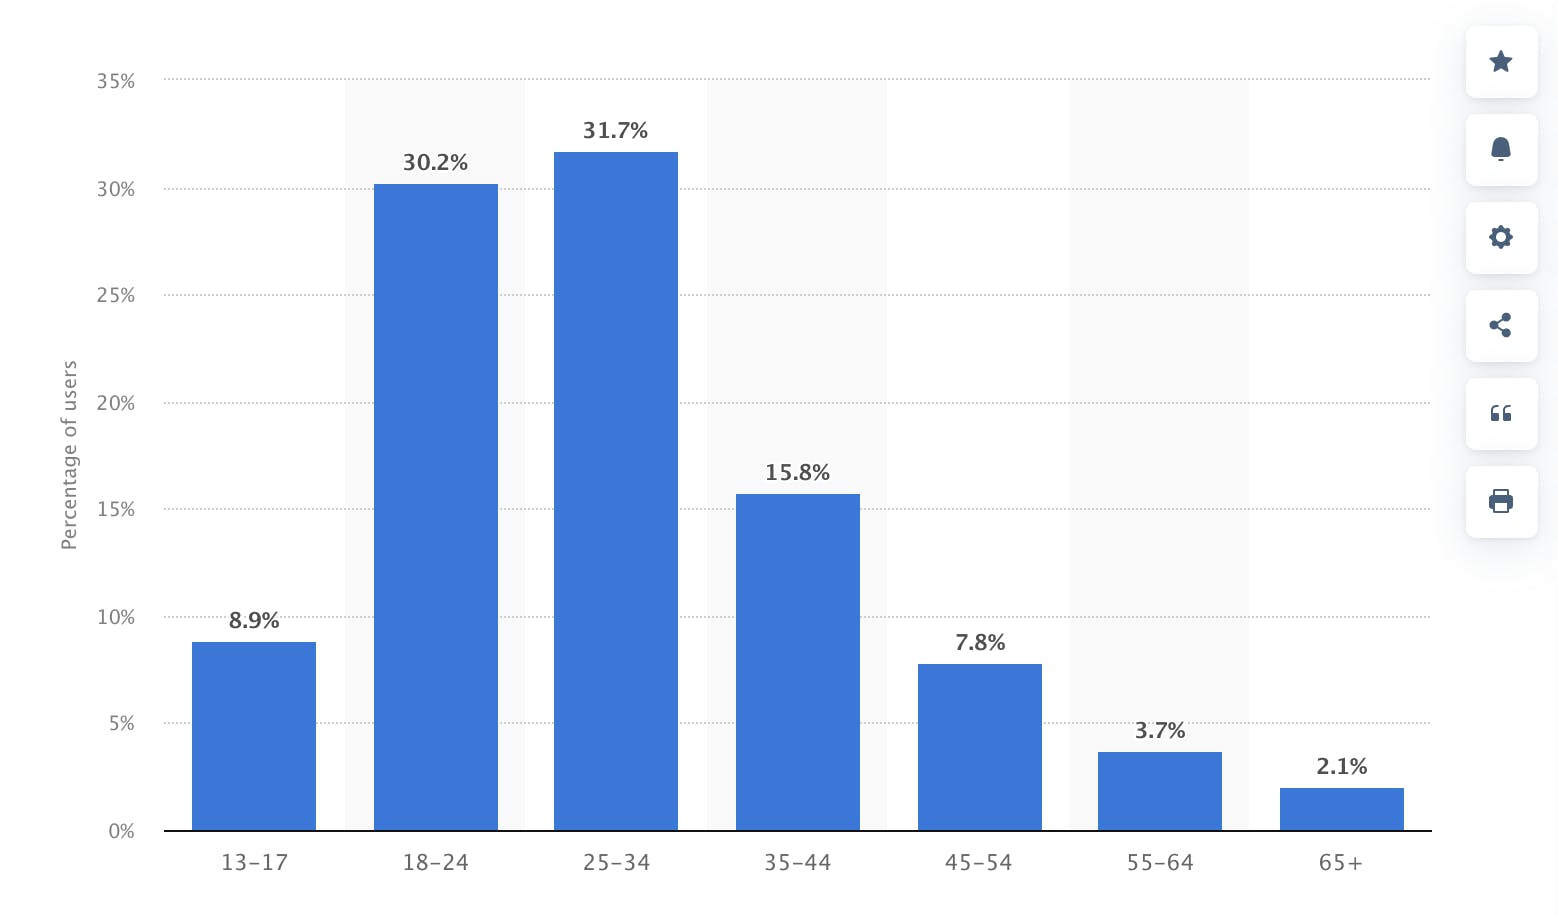 Instagram Users Distribution by Age Groups. Source: Statista (2022)